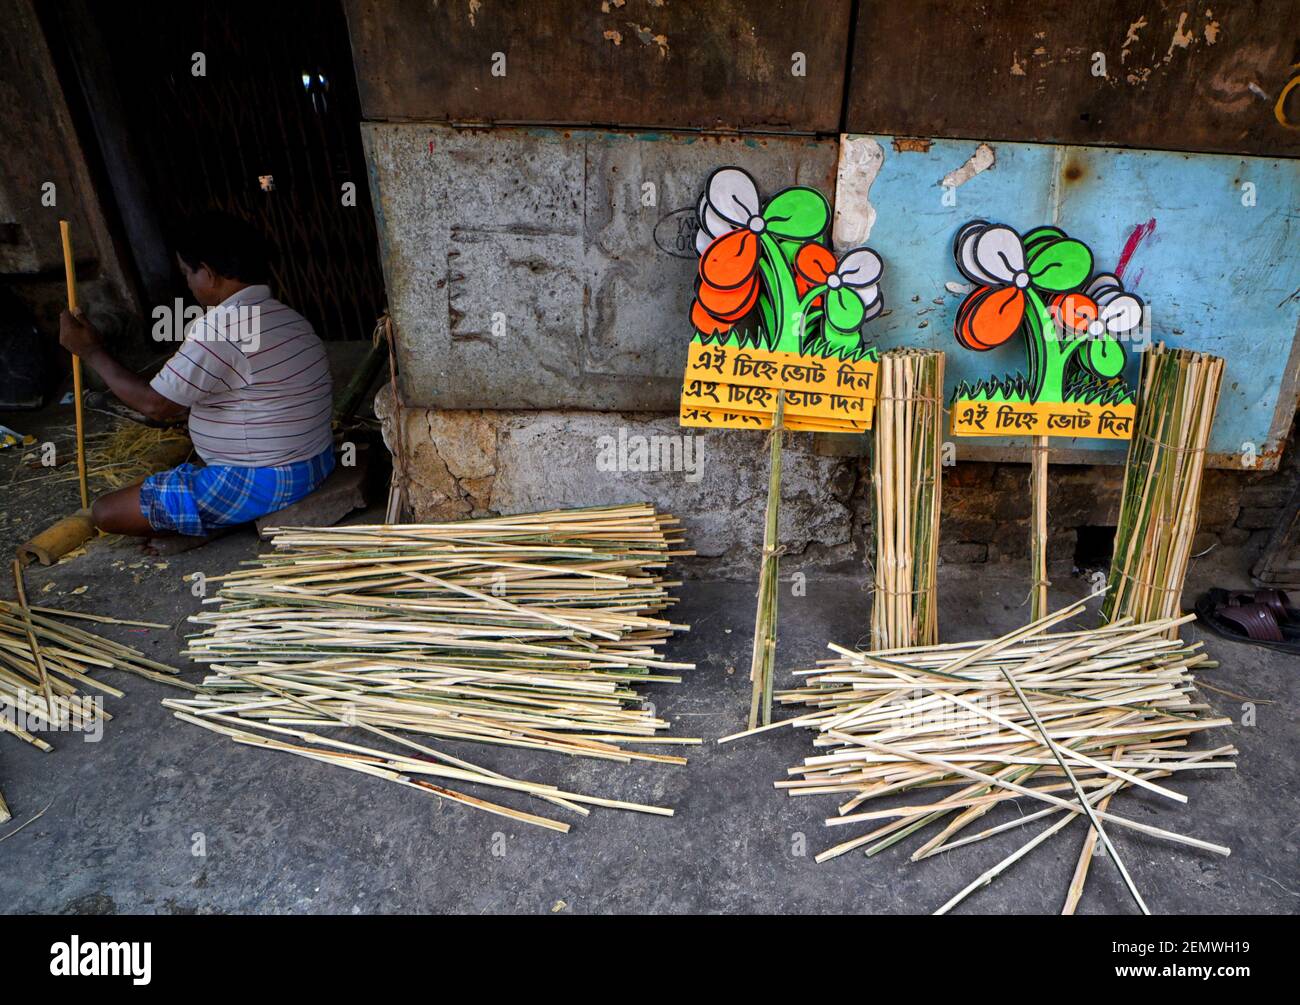 A worker seen preparing the Election Hoarding for All India Trinamool  Congress (TMC) on the street